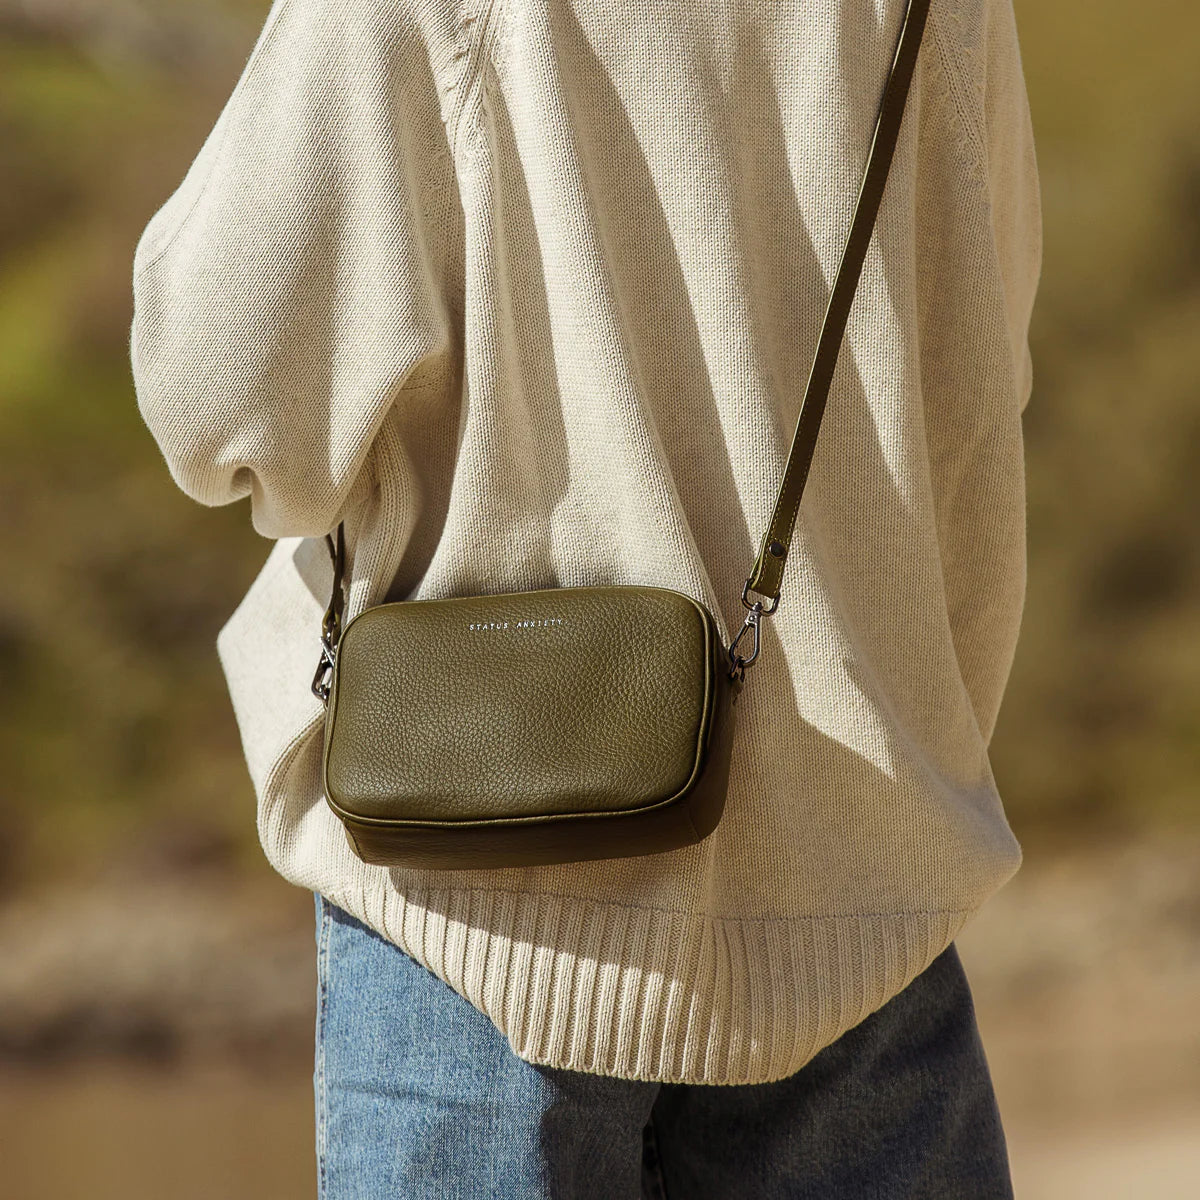 Status Anxiety plunder leather bag khaki – green with envy nz